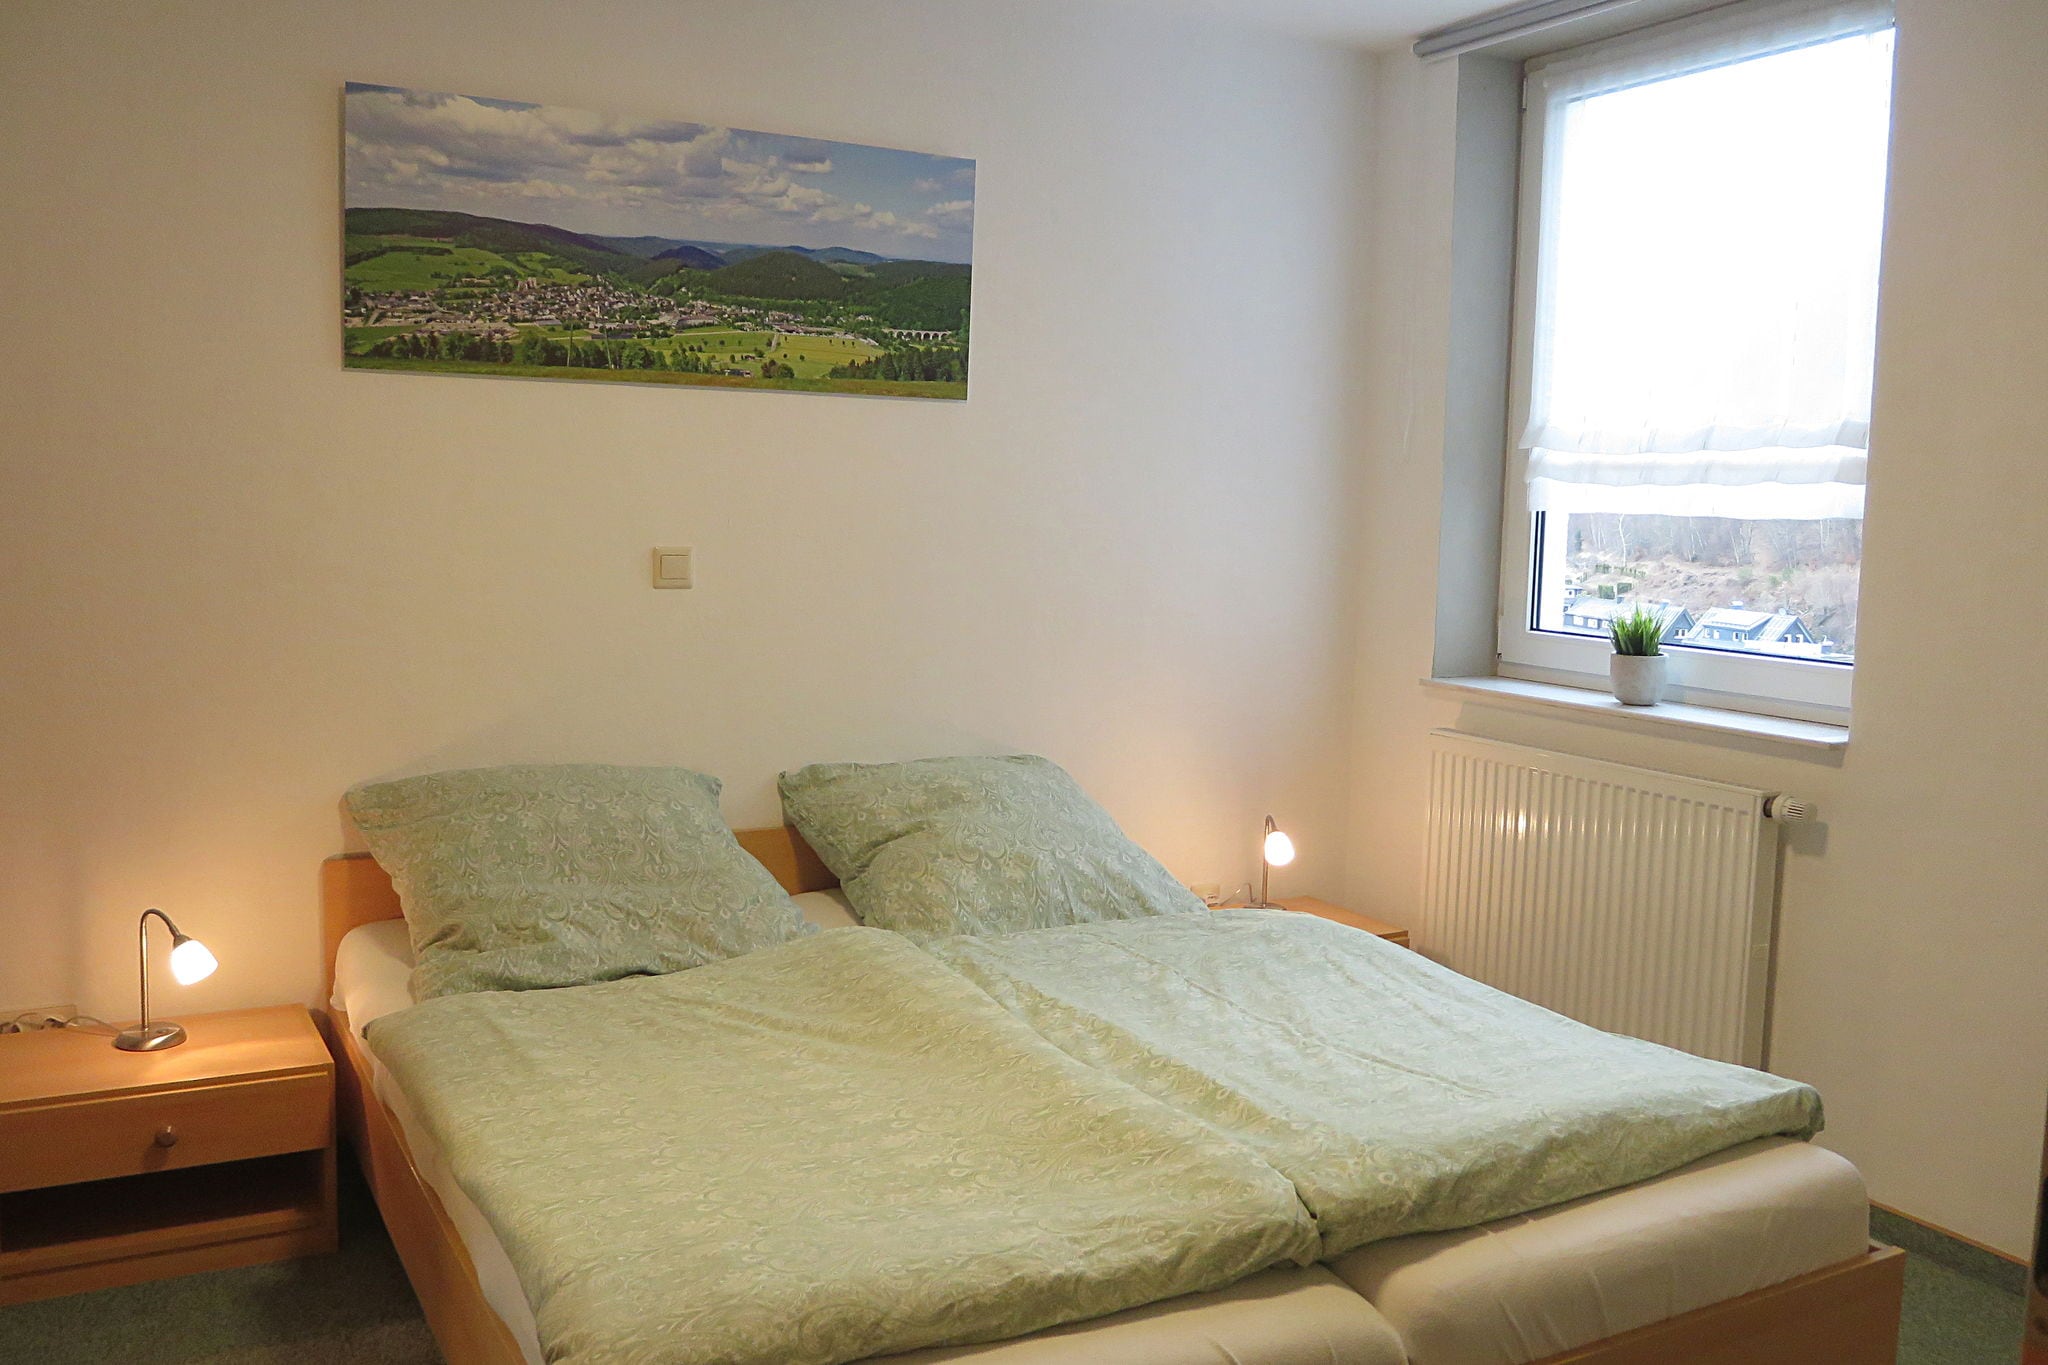 Holiday home in the centre of Willingen - balcony and lovely view of the town